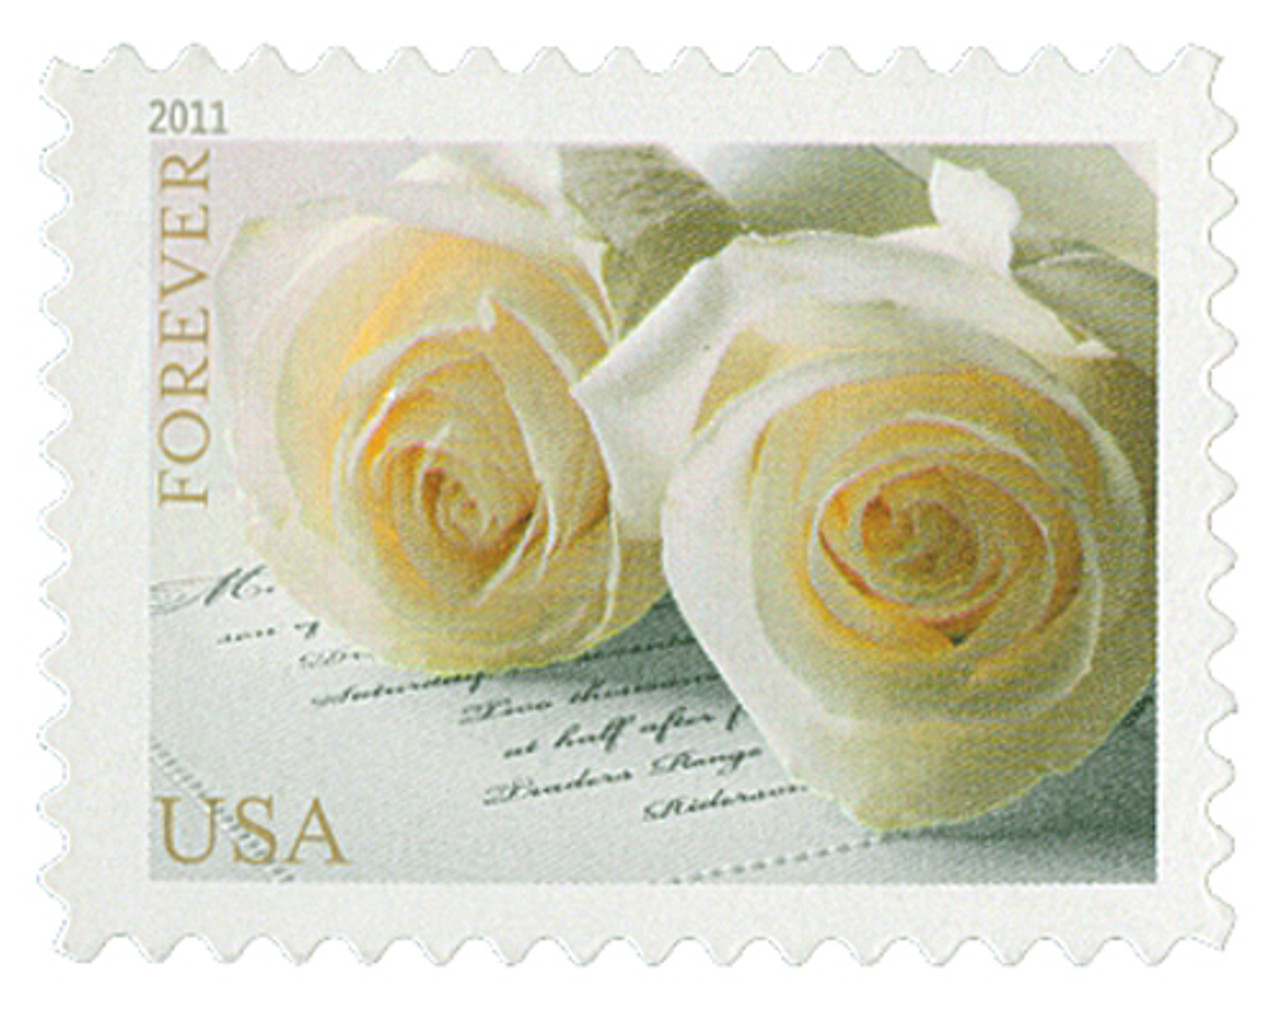 4520 - 2011 First-Class Forever Stamp - Wedding Roses - Mystic Stamp Company